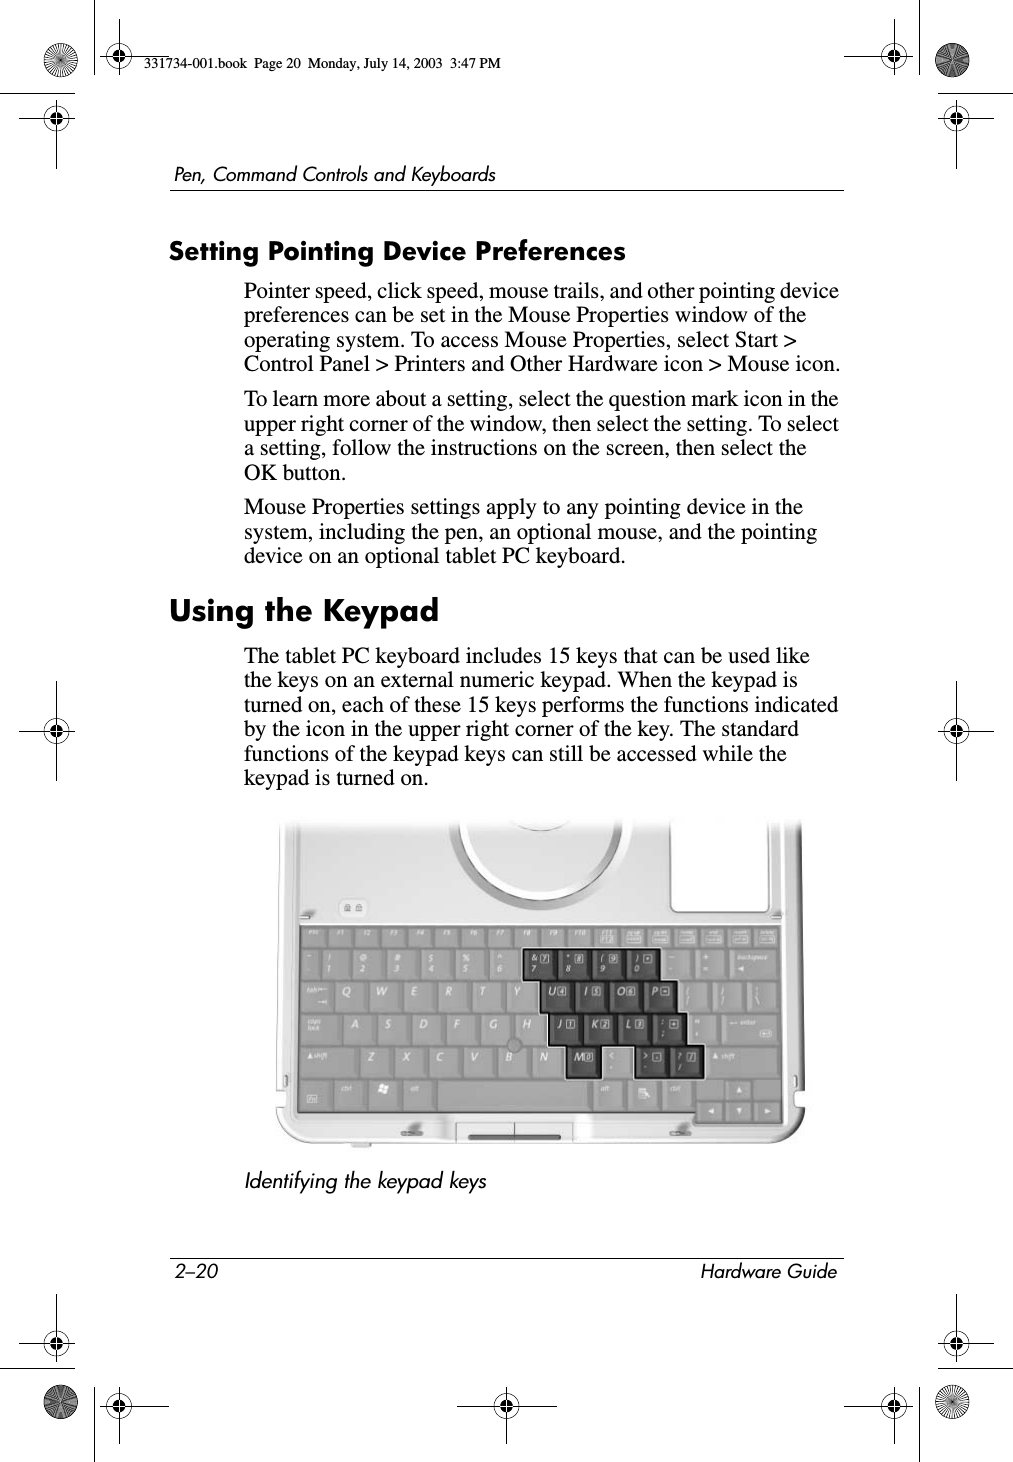 2–20 Hardware GuidePen, Command Controls and KeyboardsSetting Pointing Device PreferencesPointer speed, click speed, mouse trails, and other pointing device preferences can be set in the Mouse Properties window of the operating system. To access Mouse Properties, select Start &gt; Control Panel &gt; Printers and Other Hardware icon &gt; Mouse icon.To learn more about a setting, select the question mark icon in the upper right corner of the window, then select the setting. To select a setting, follow the instructions on the screen, then select the OK button.Mouse Properties settings apply to any pointing device in the system, including the pen, an optional mouse, and the pointing device on an optional tablet PC keyboard.Using the KeypadThe tablet PC keyboard includes 15 keys that can be used like the keys on an external numeric keypad. When the keypad is turned on, each of these 15 keys performs the functions indicated by the icon in the upper right corner of the key. The standard functions of the keypad keys can still be accessed while the keypad is turned on.Identifying the keypad keys331734-001.book  Page 20  Monday, July 14, 2003  3:47 PM